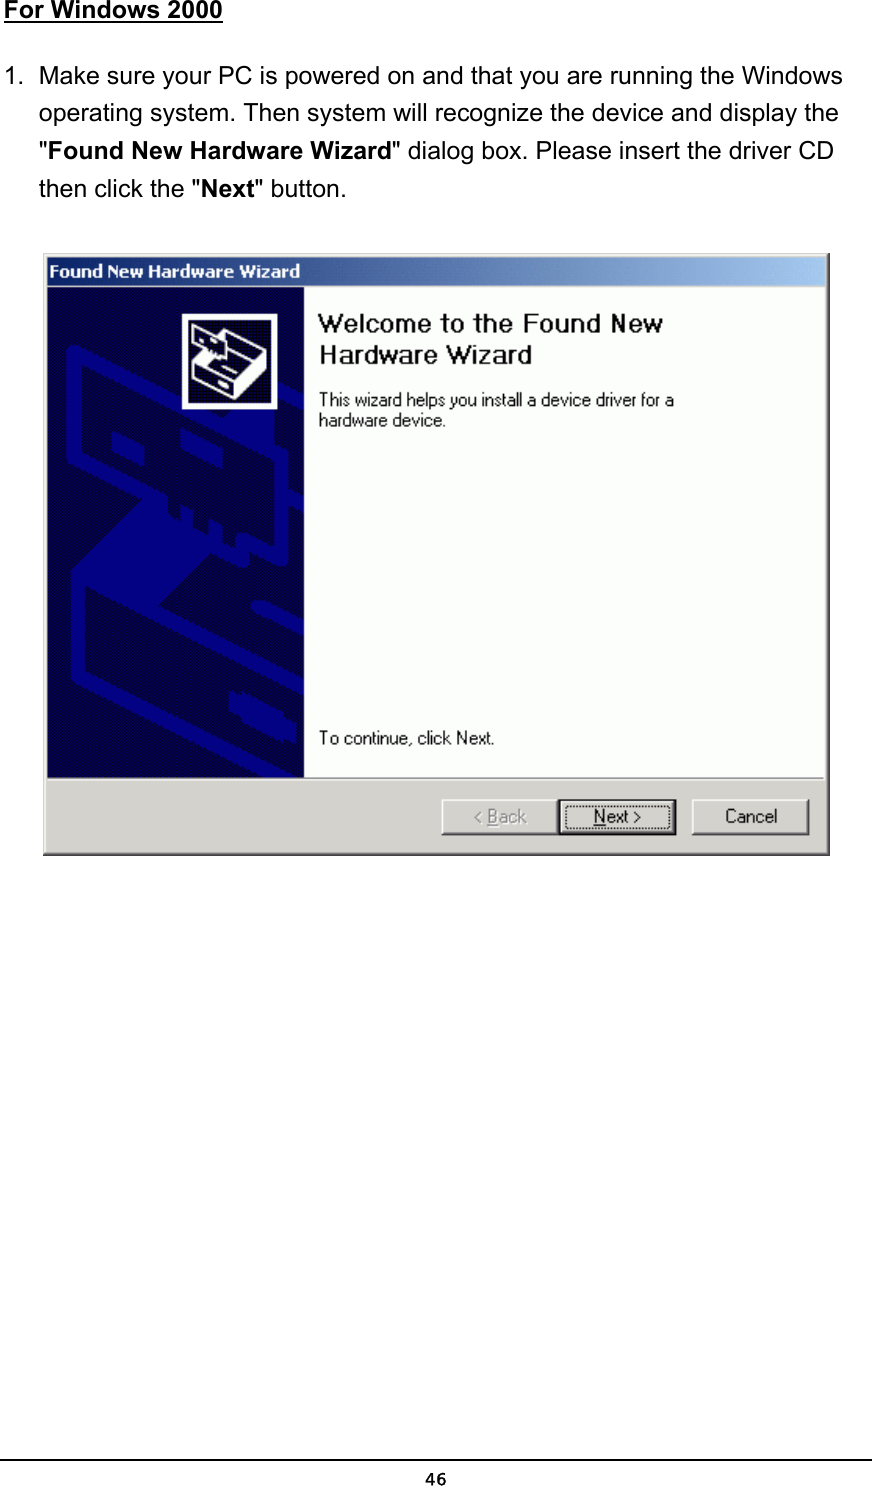   46For Windows 2000 1.  Make sure your PC is powered on and that you are running the Windows operating system. Then system will recognize the device and display the &quot;Found New Hardware Wizard&quot; dialog box. Please insert the driver CD then click the &quot;Next&quot; button.  